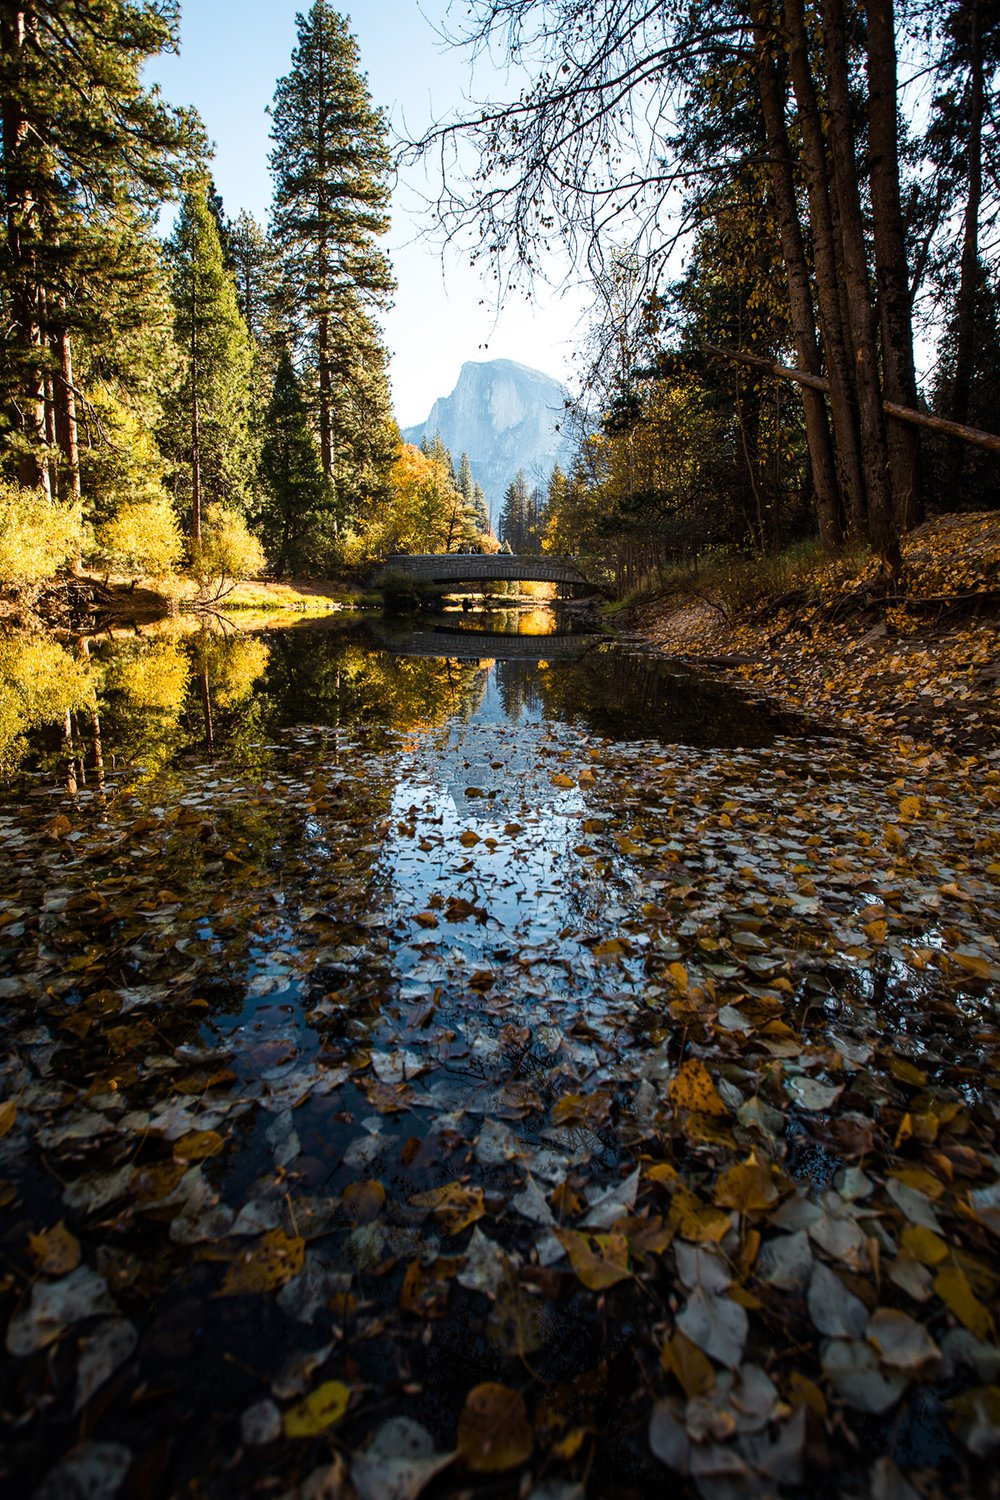 A view of Half Dome from a river with fallen leaves.